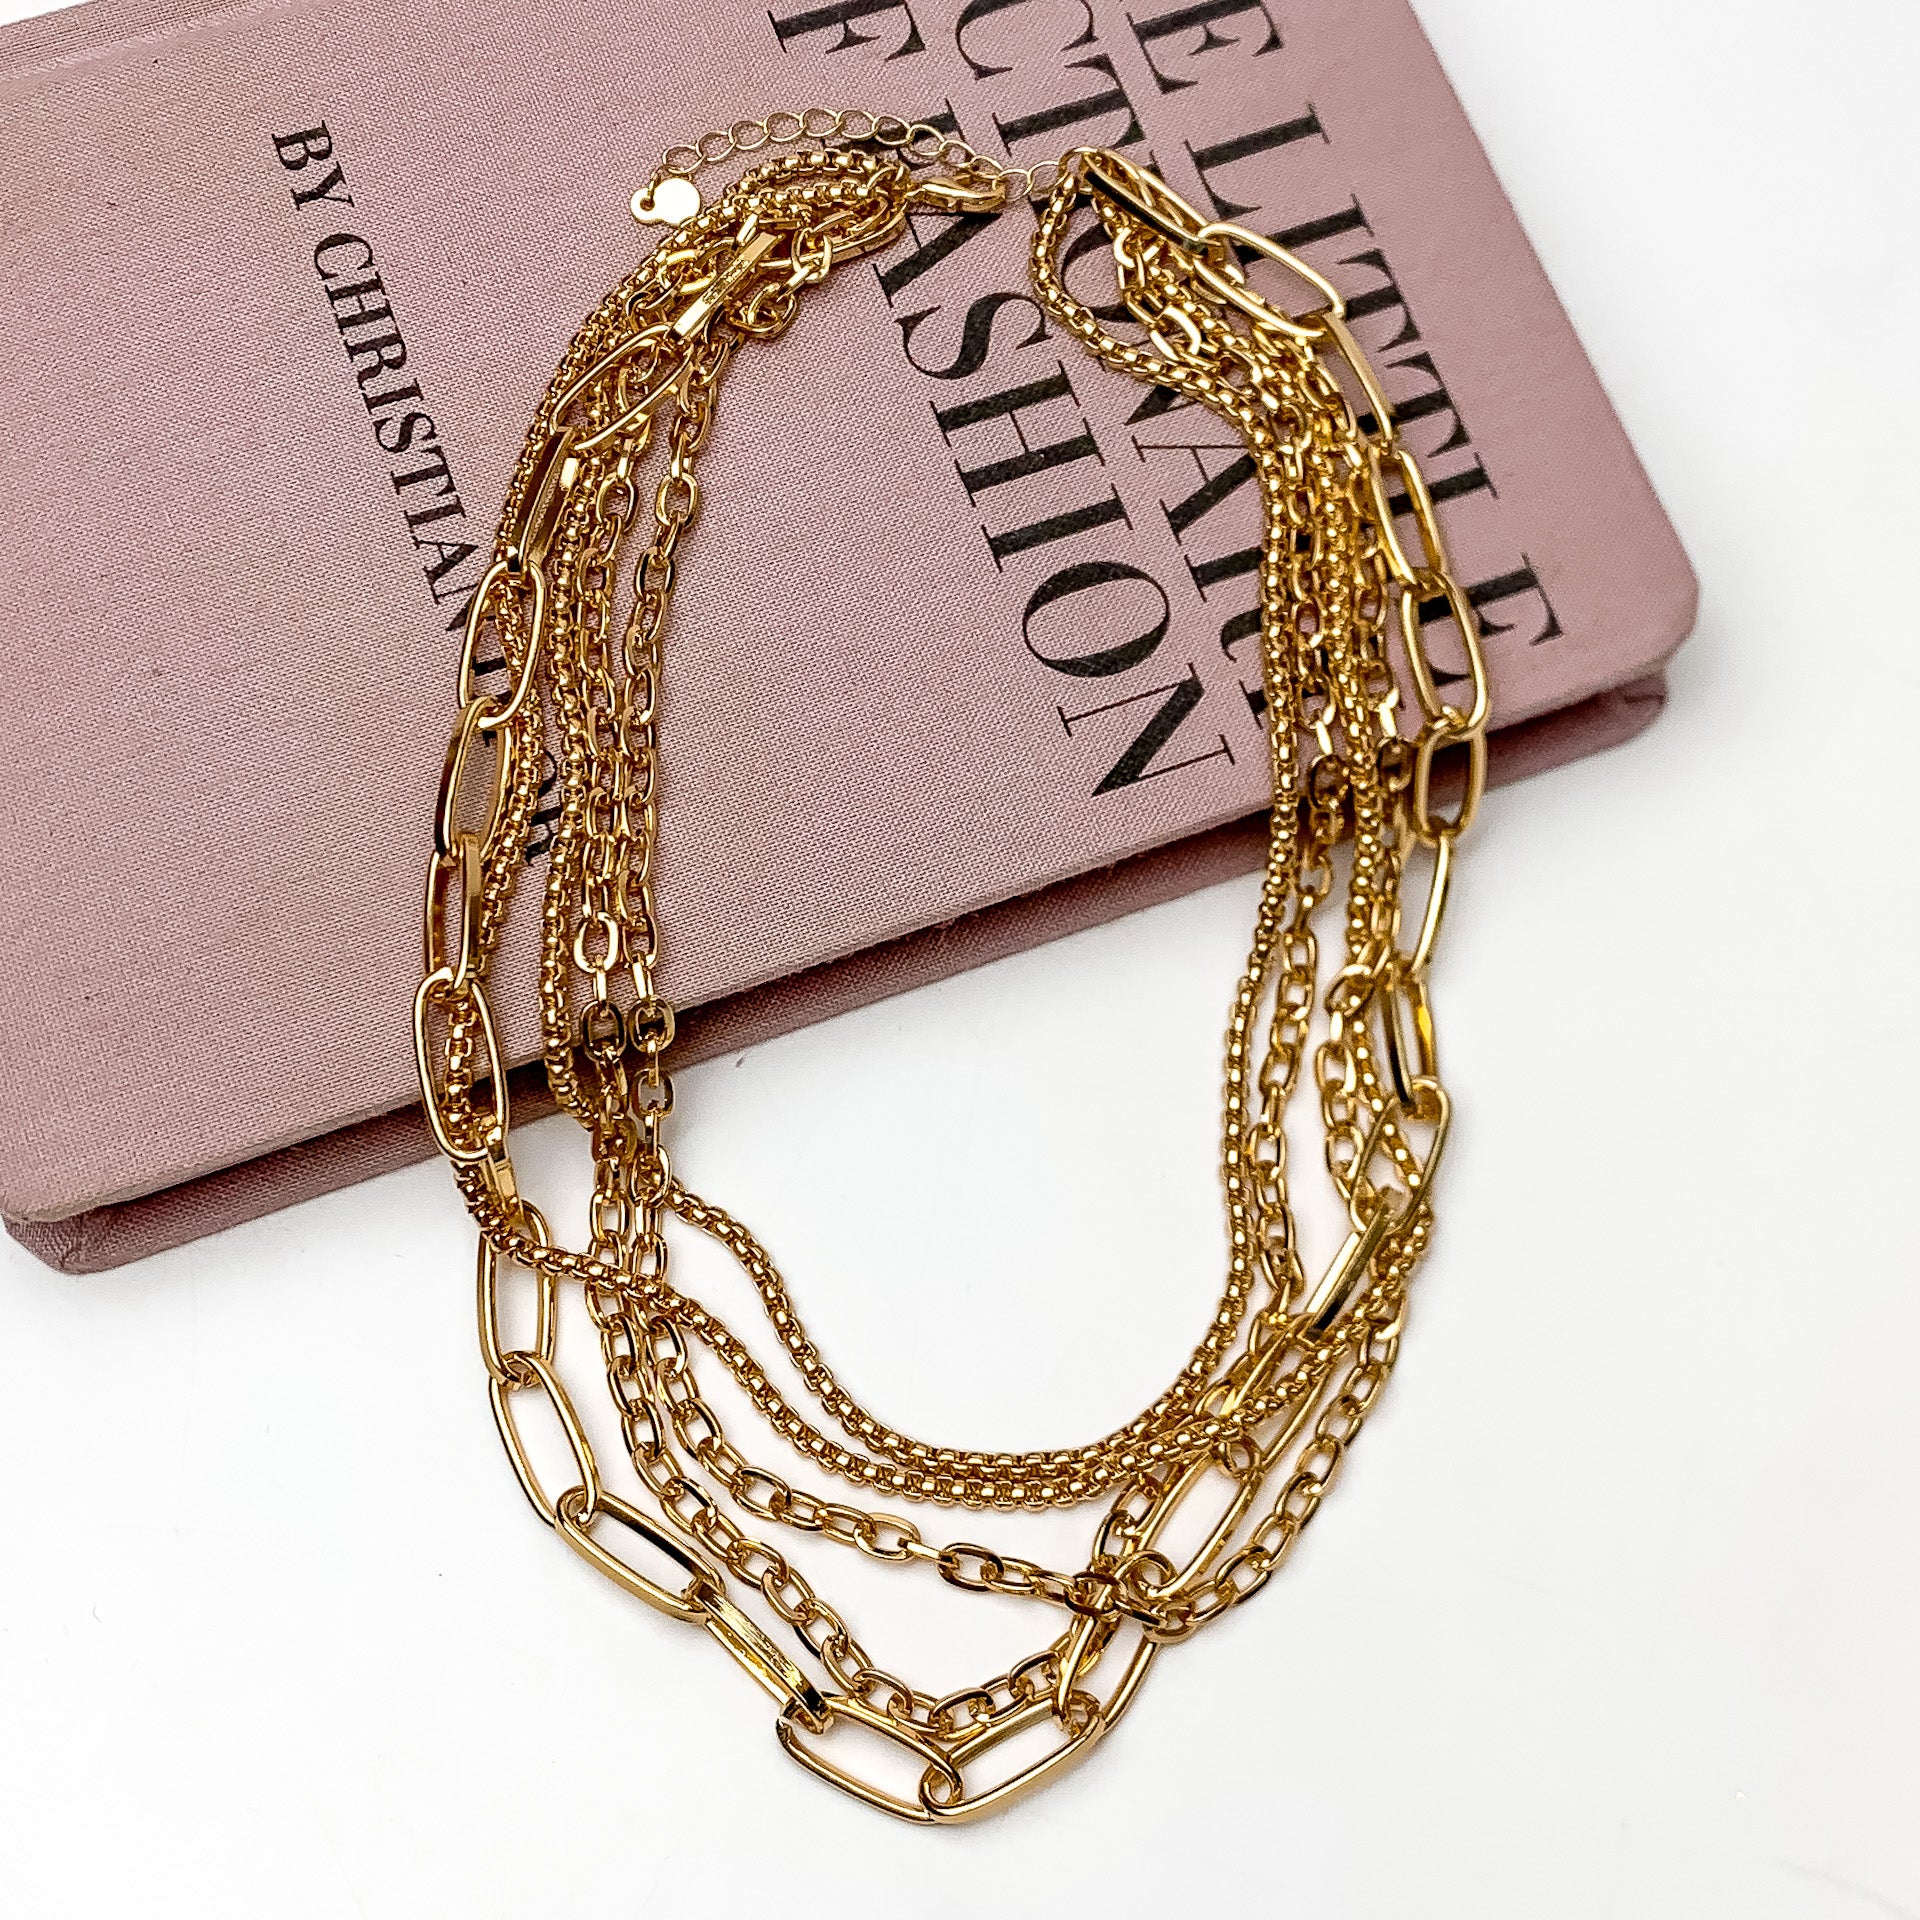 Five Strand Multi Chain Necklace in Gold Tone - Giddy Up Glamour Boutique